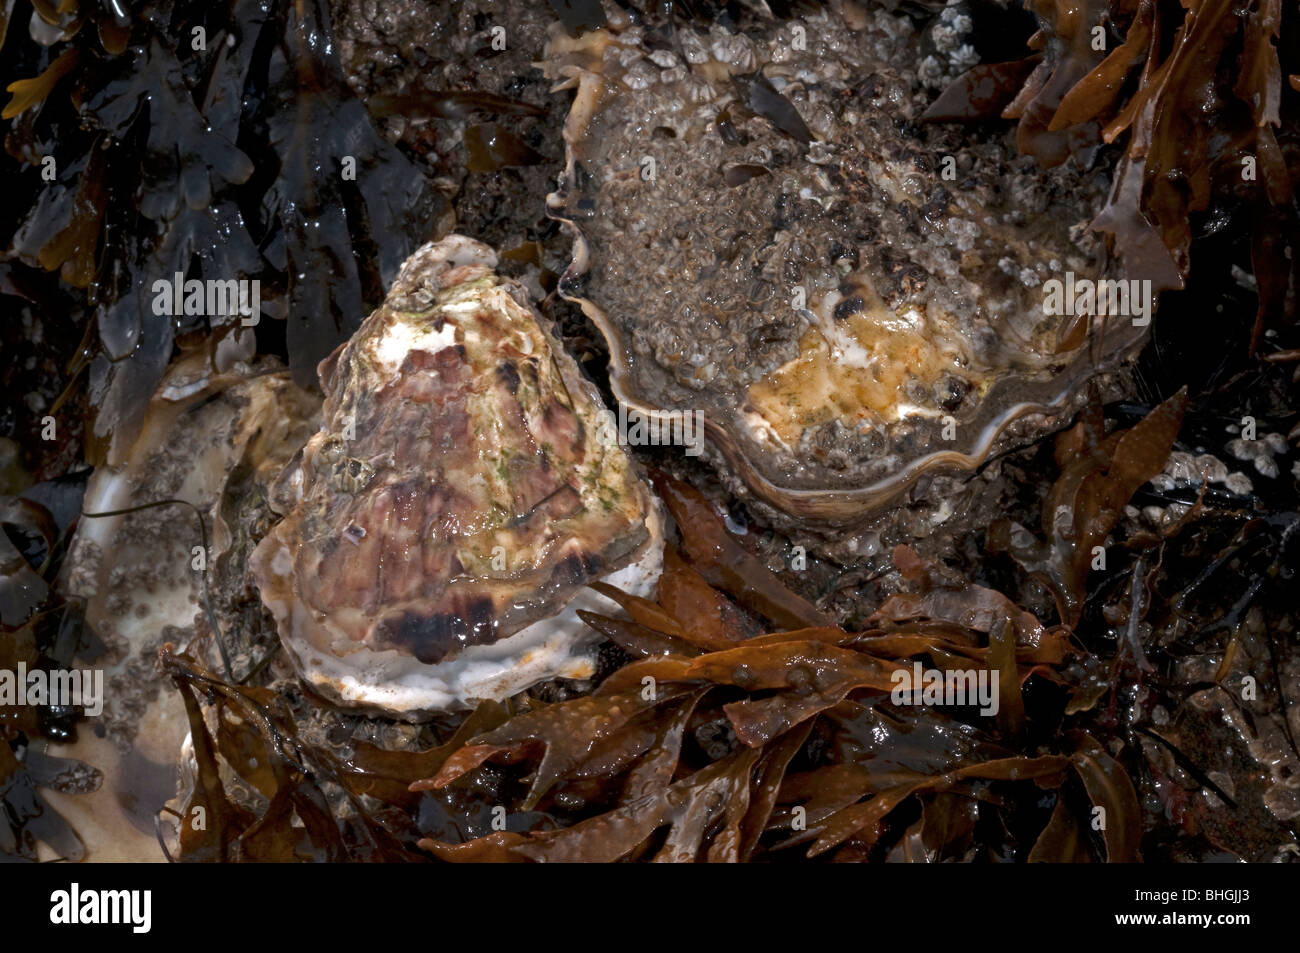 Common Oyster, Flat Oyster, European Flat Oyster (Ostrea edulis), living animals attached to wooden posts. Stock Photo